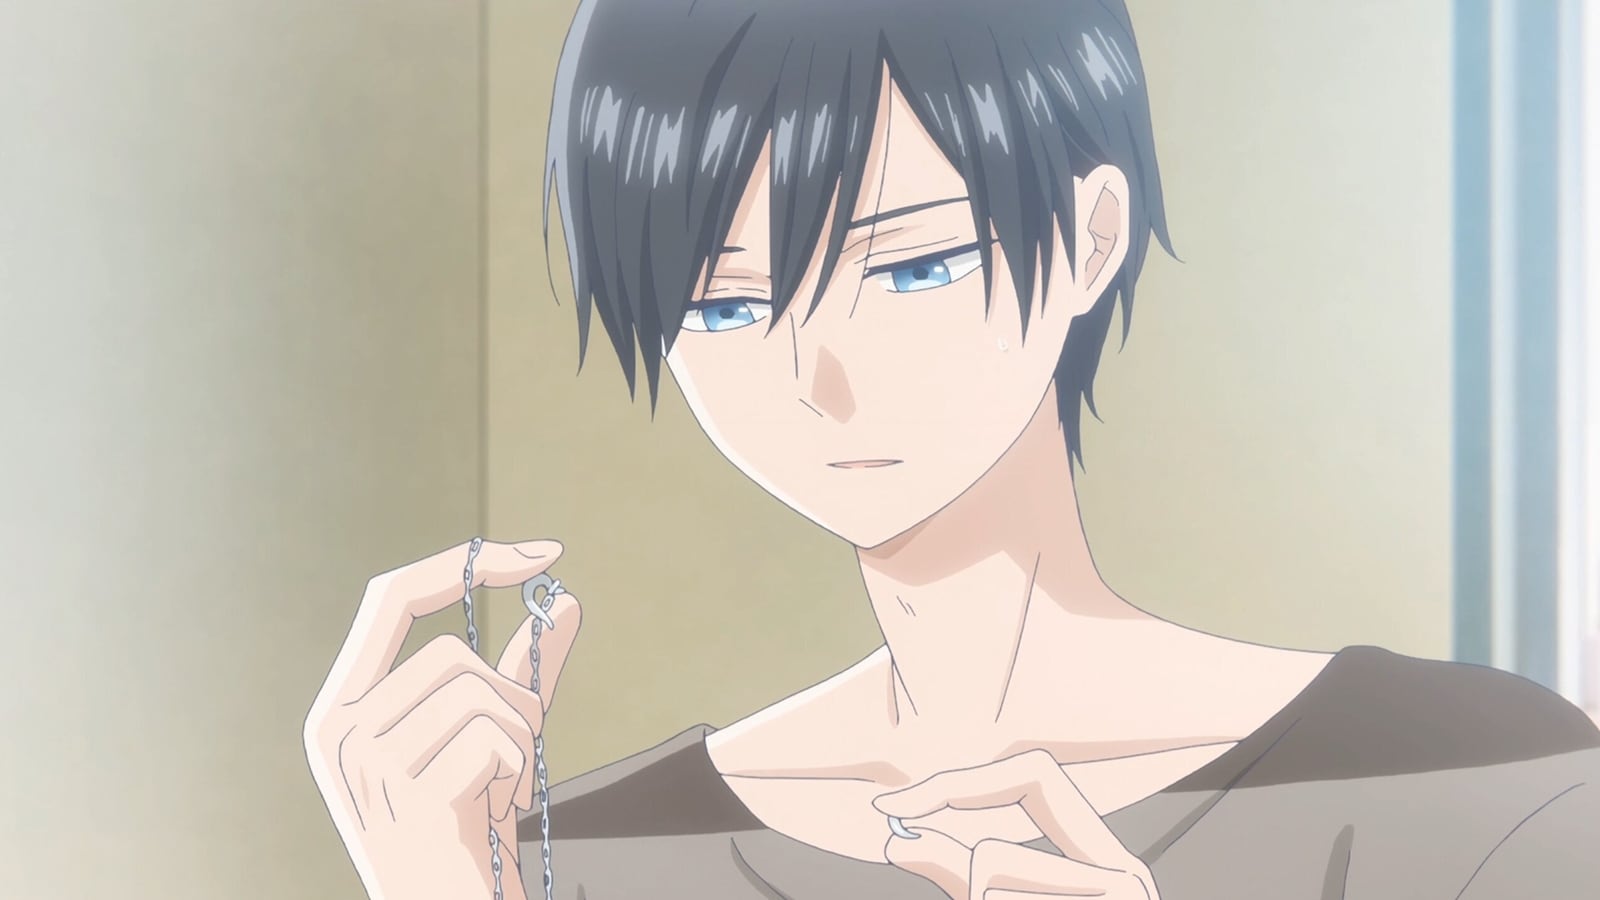 Lost Necklaces & Romance: My Love Story With Yamada Kun At Lv999 Episode 2 Recap